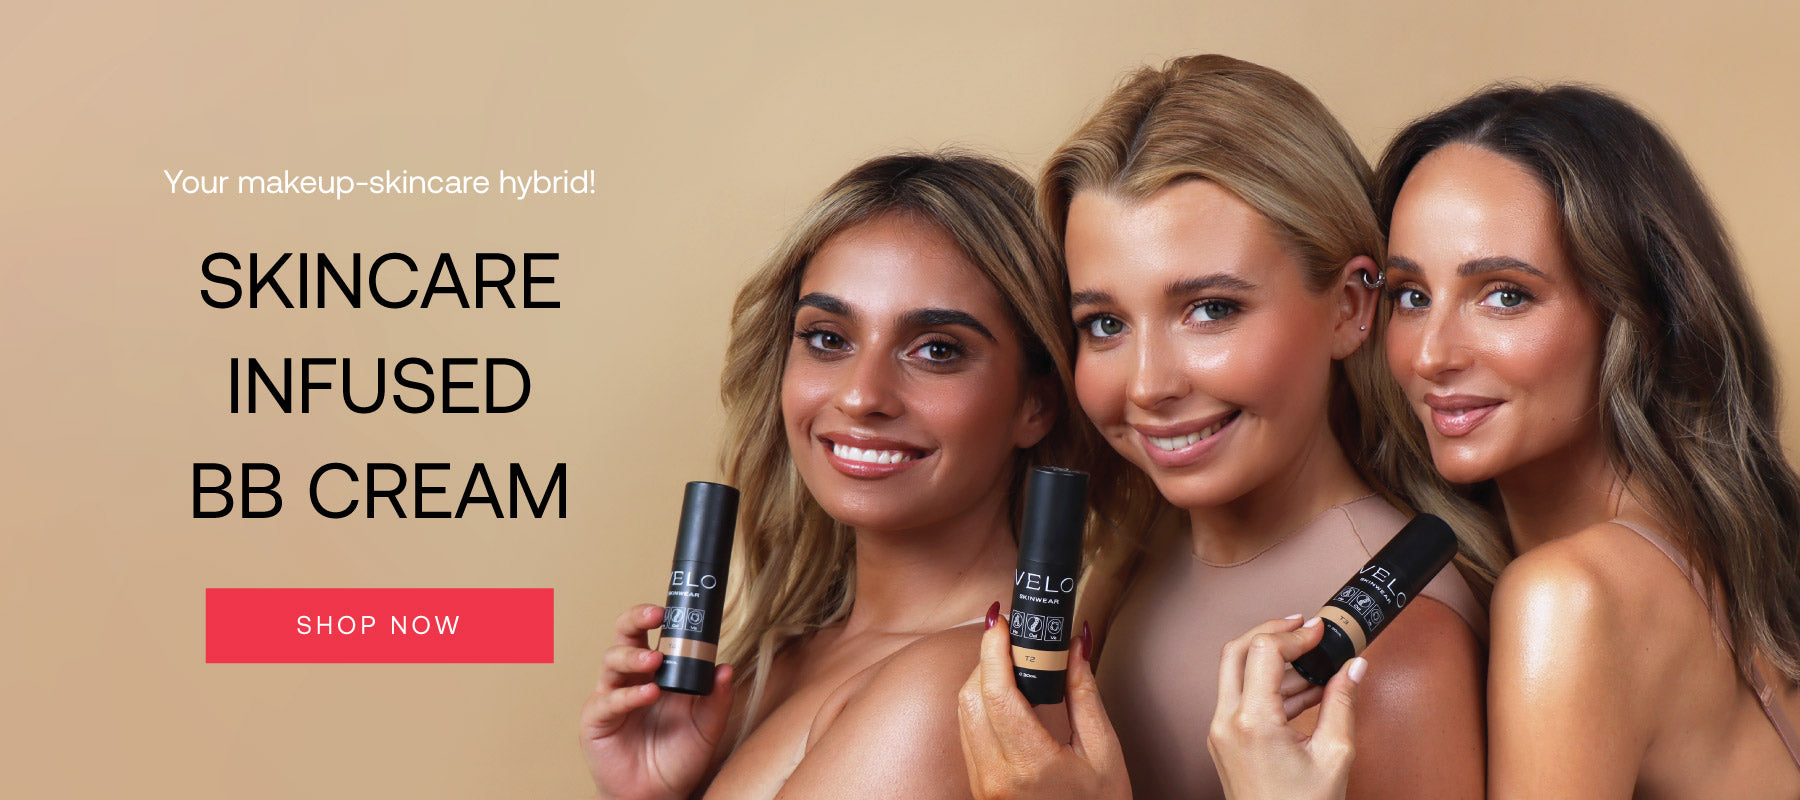 Shop BB cream now image, with link to the online shop